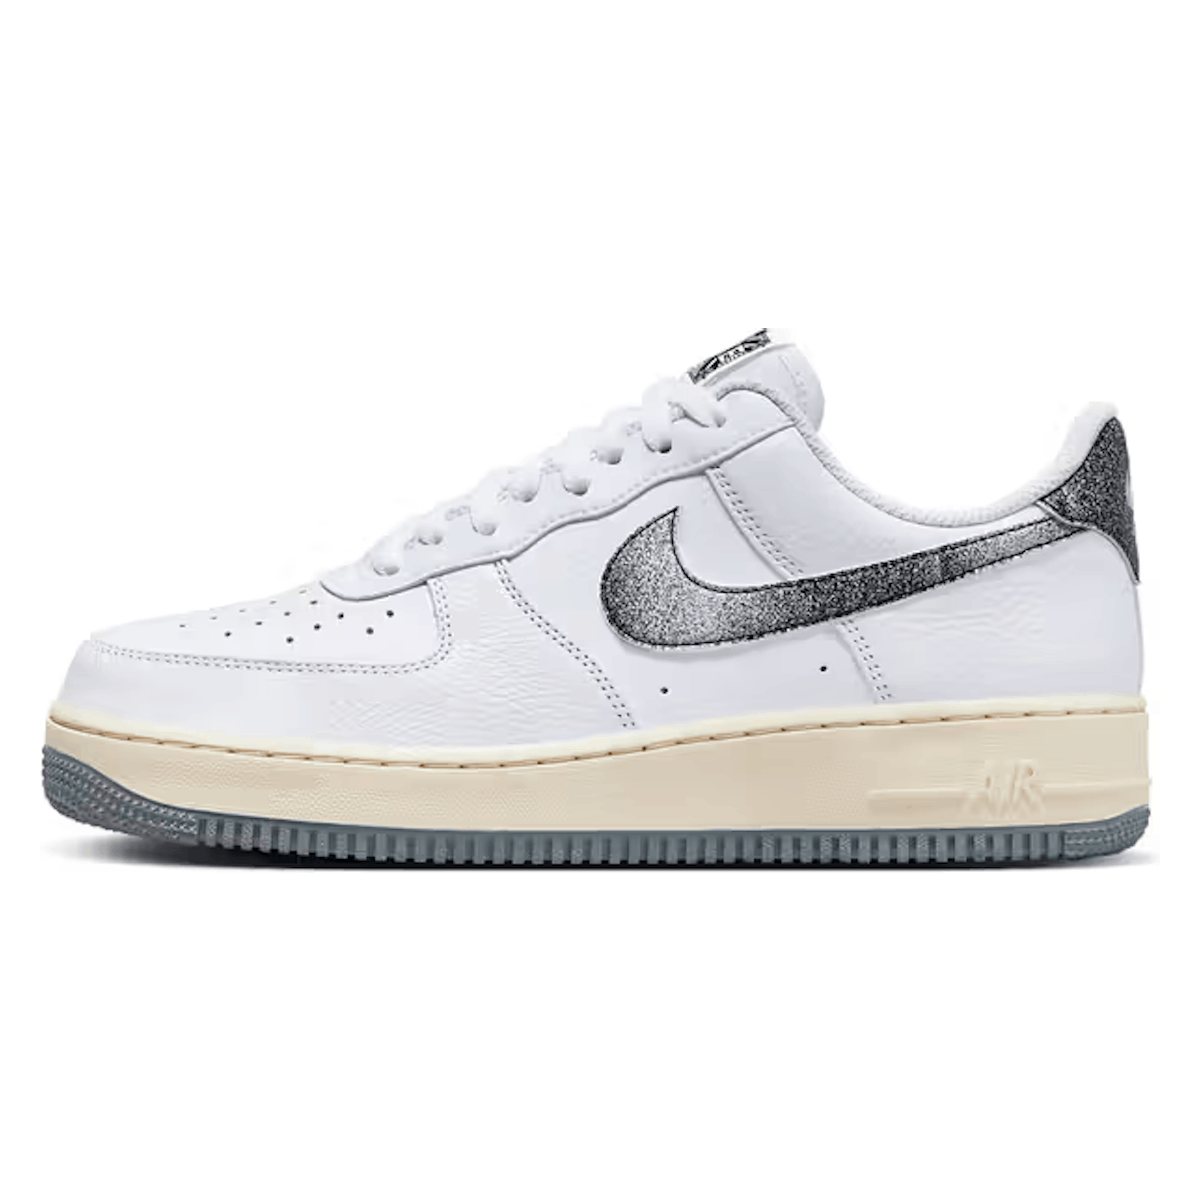 Nike Air Force 1 '07 LX "50 Years of Hip-Hop"